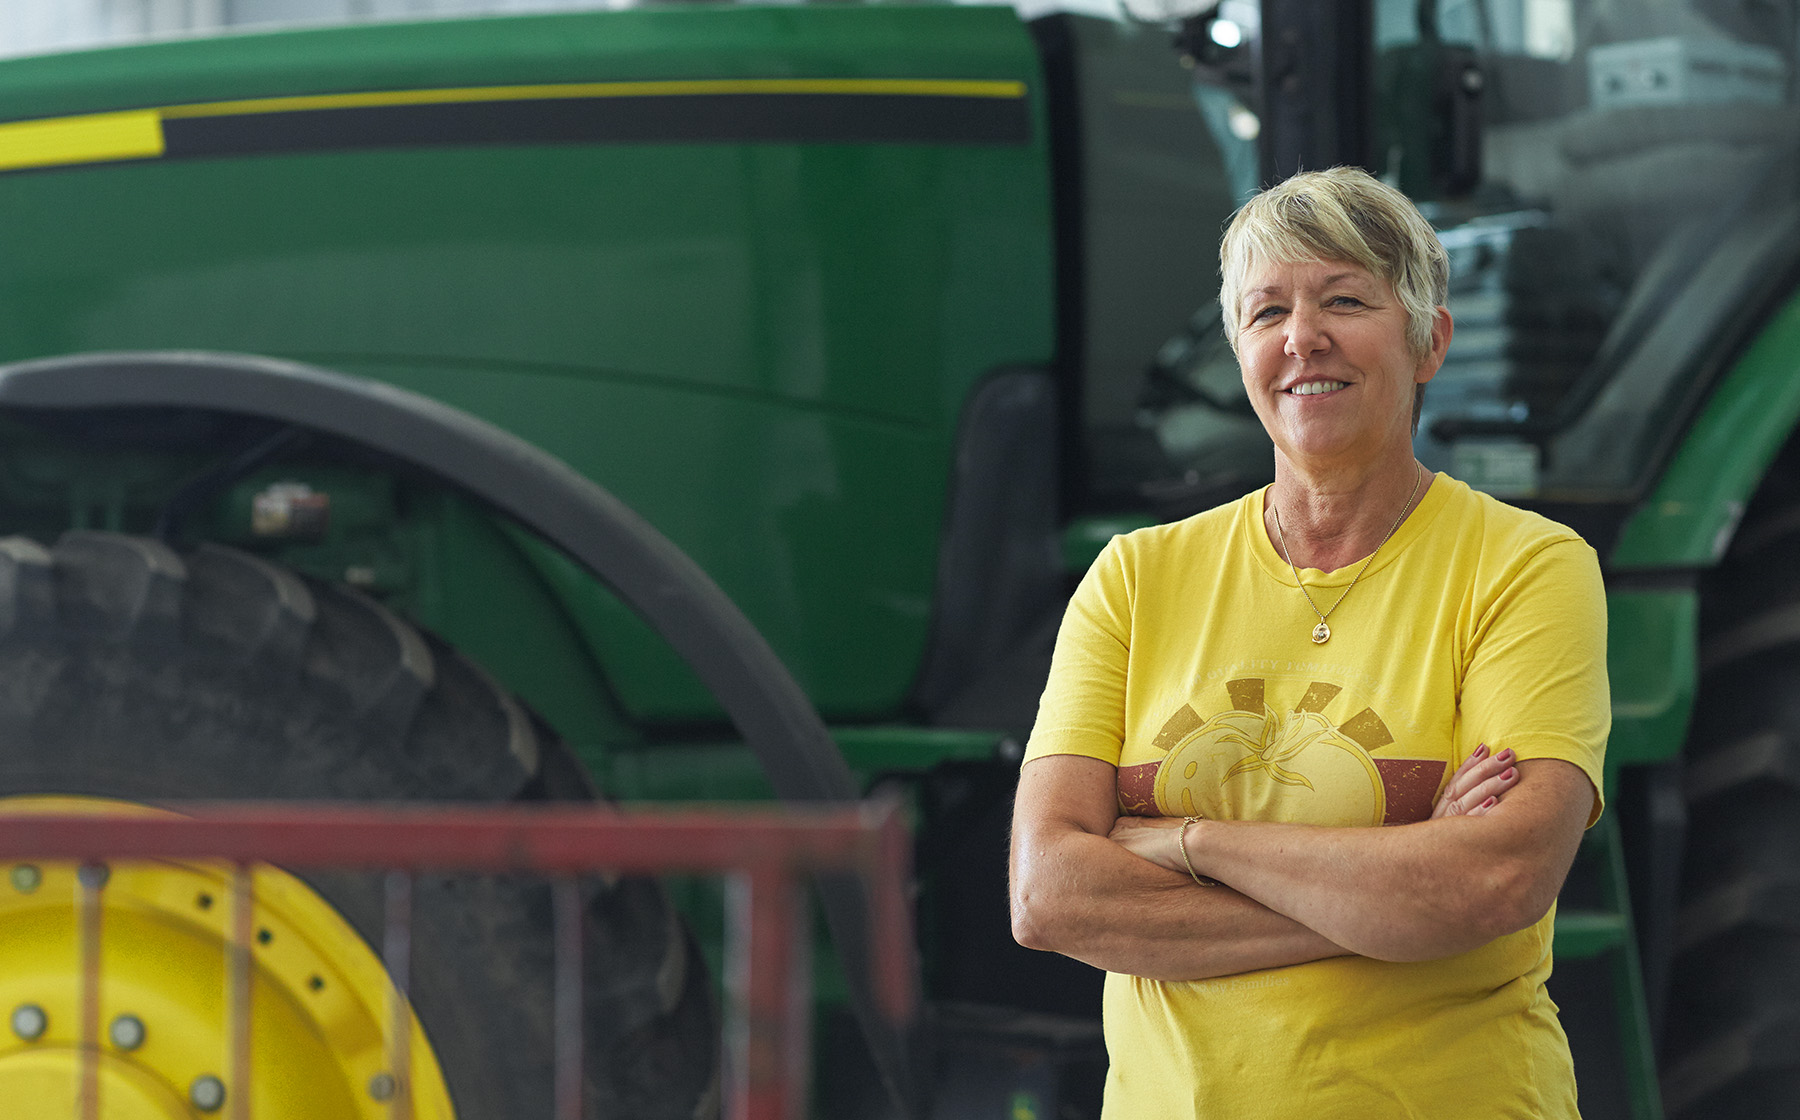 Image of Janice AcMoody wife to Vern who is a Red Gold Tomato grower standing in front of green tractor